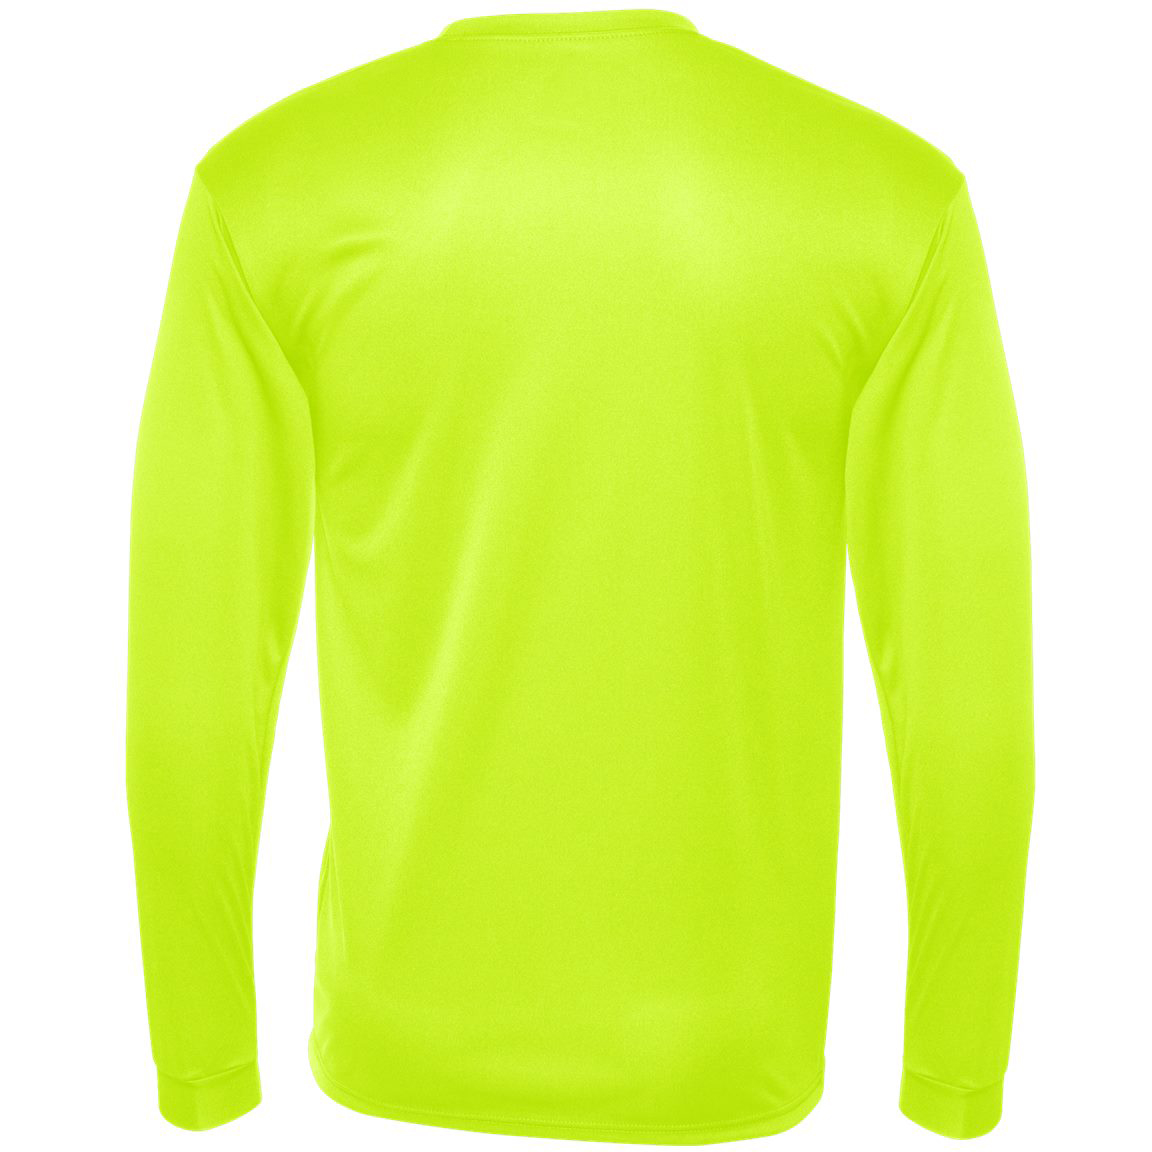 C2 Sport 5104 Performance Long Sleeve T-Shirt - Safety Yellow ...